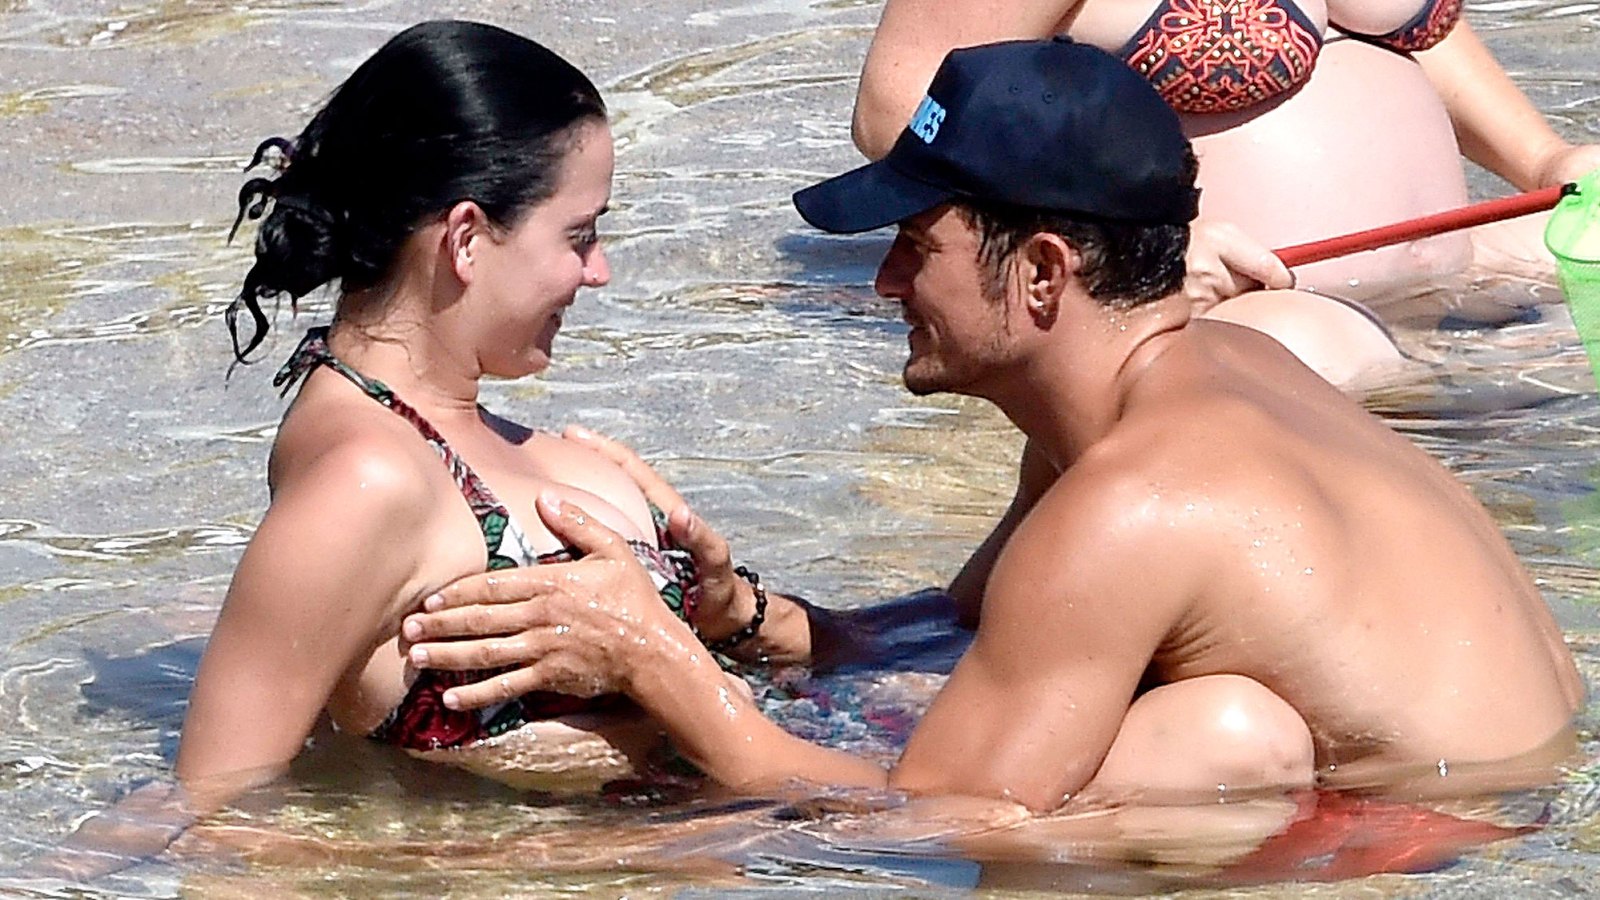 Katy Perry Celeb Porn - Orlando Bloom Grabs Katy Perry's Boobs During Beach Vacation